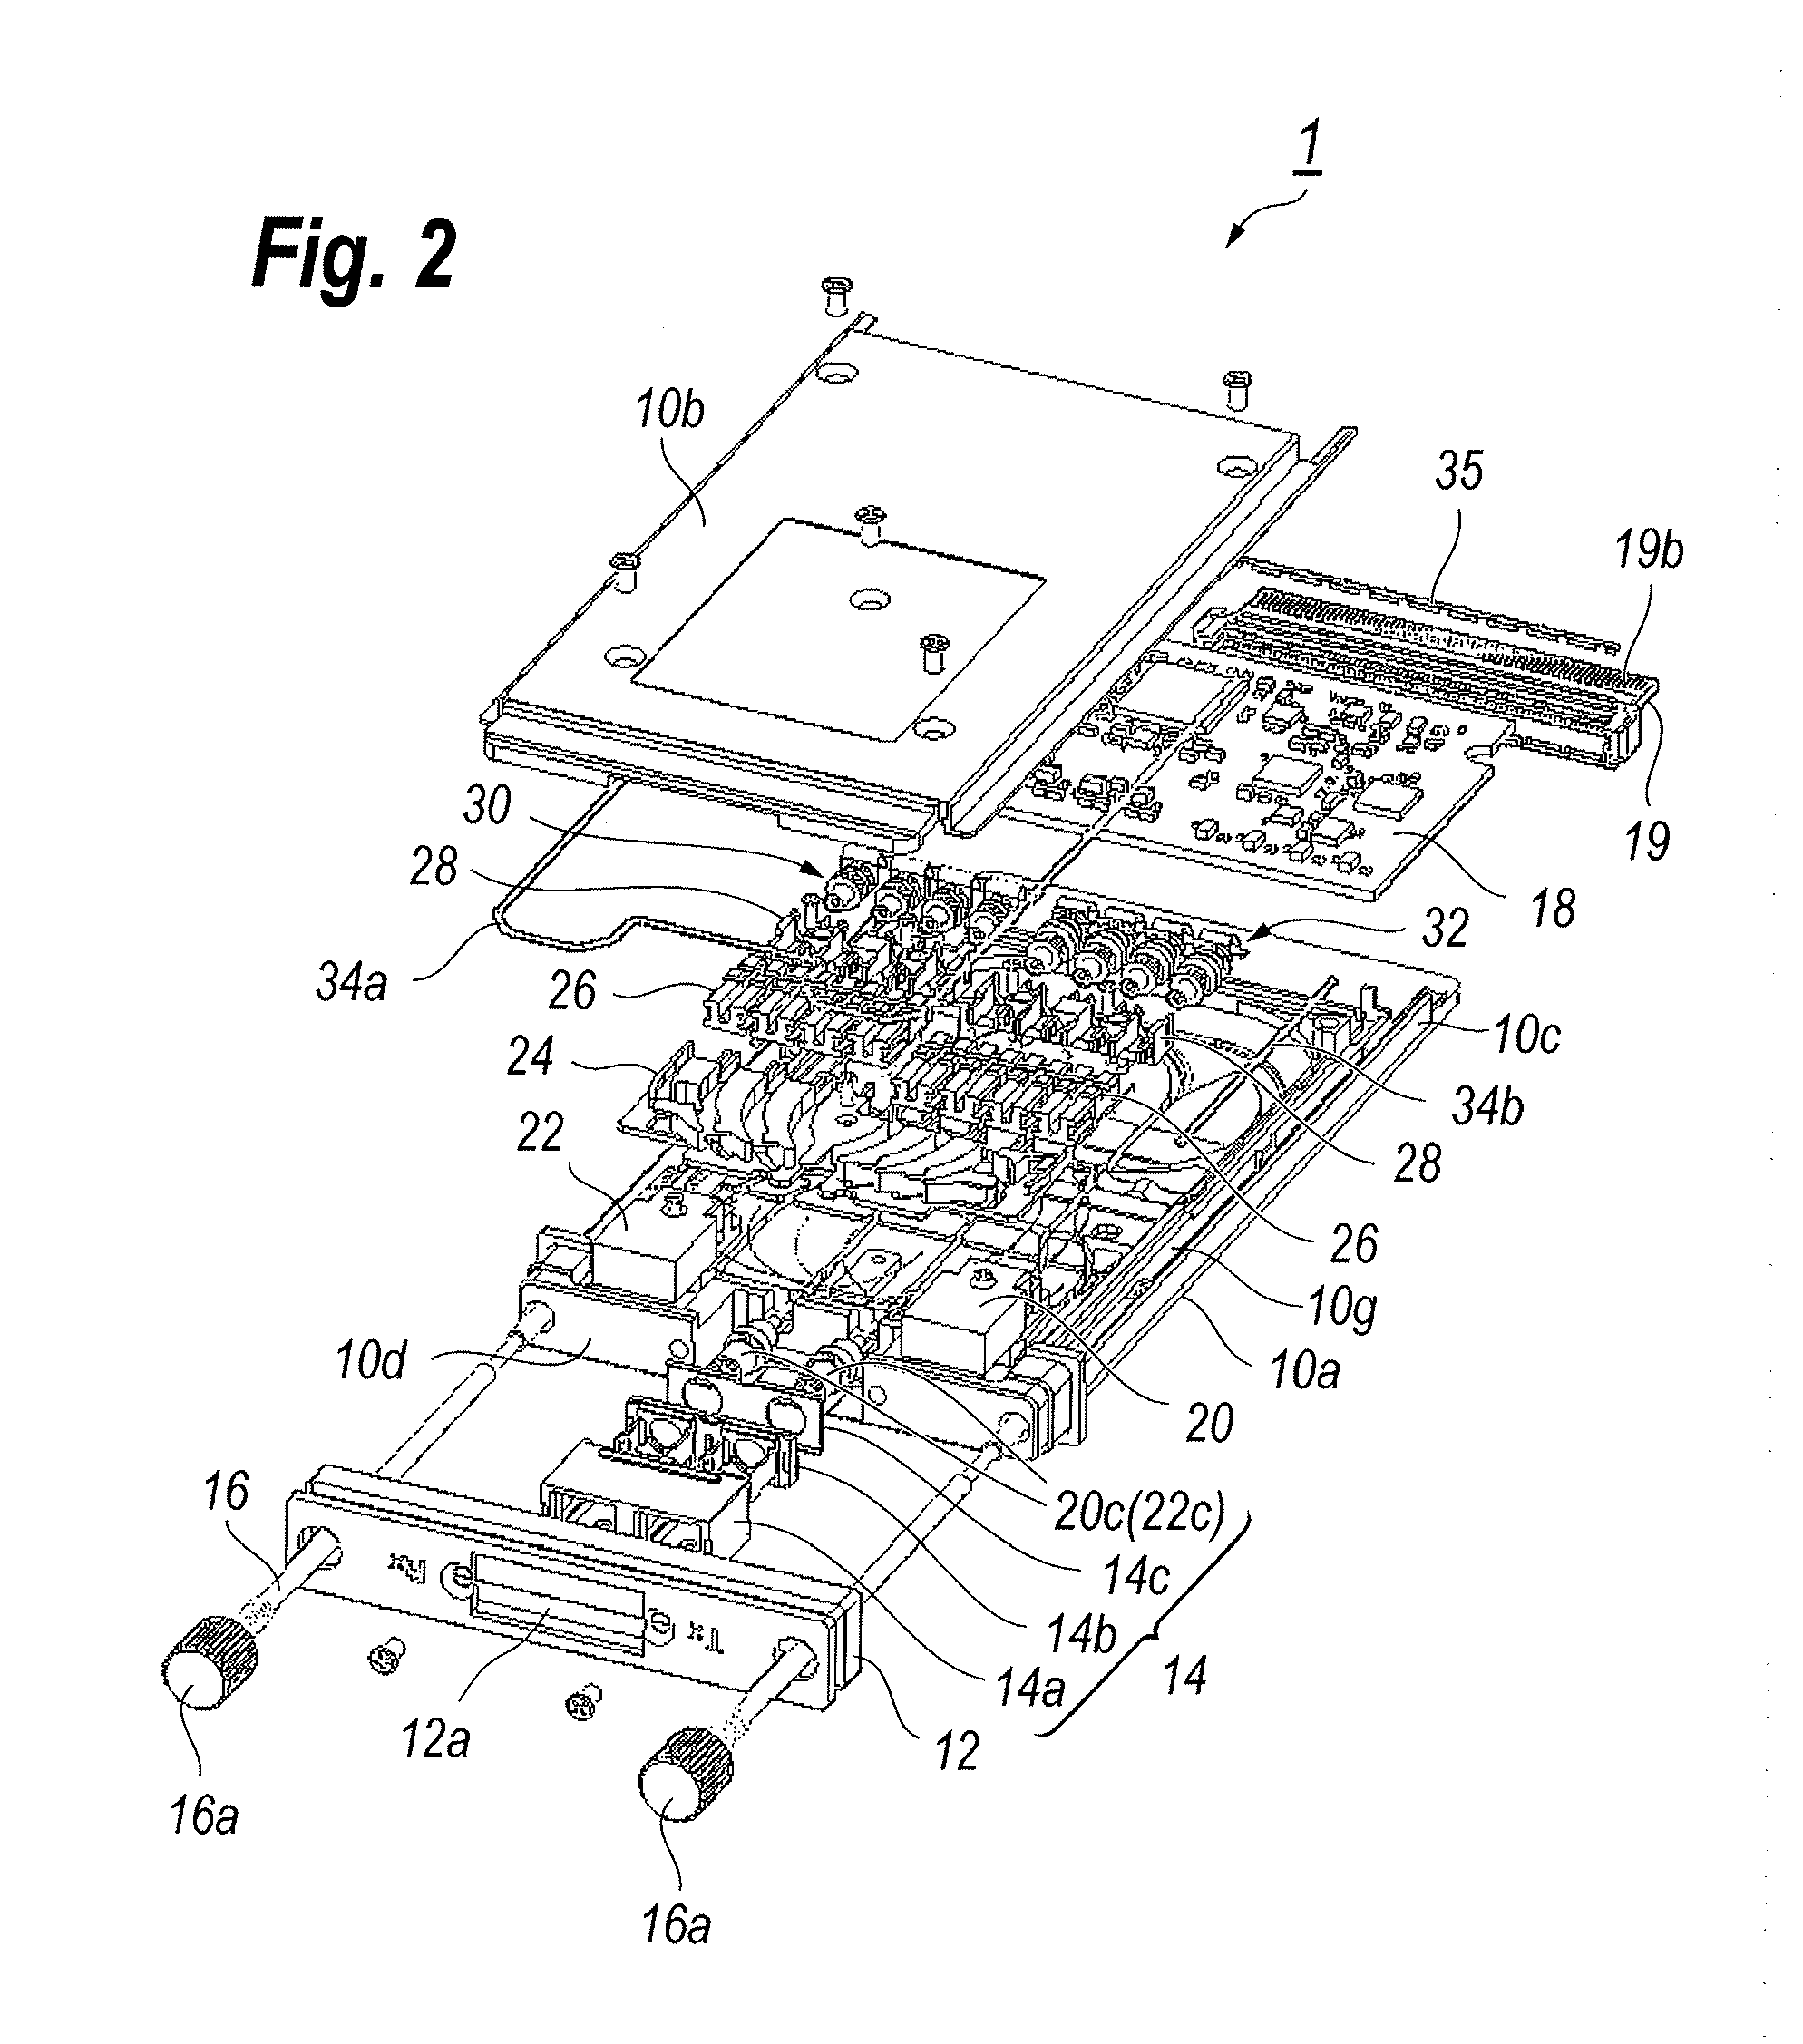 Pluggable optical transceiver having functional latch screw